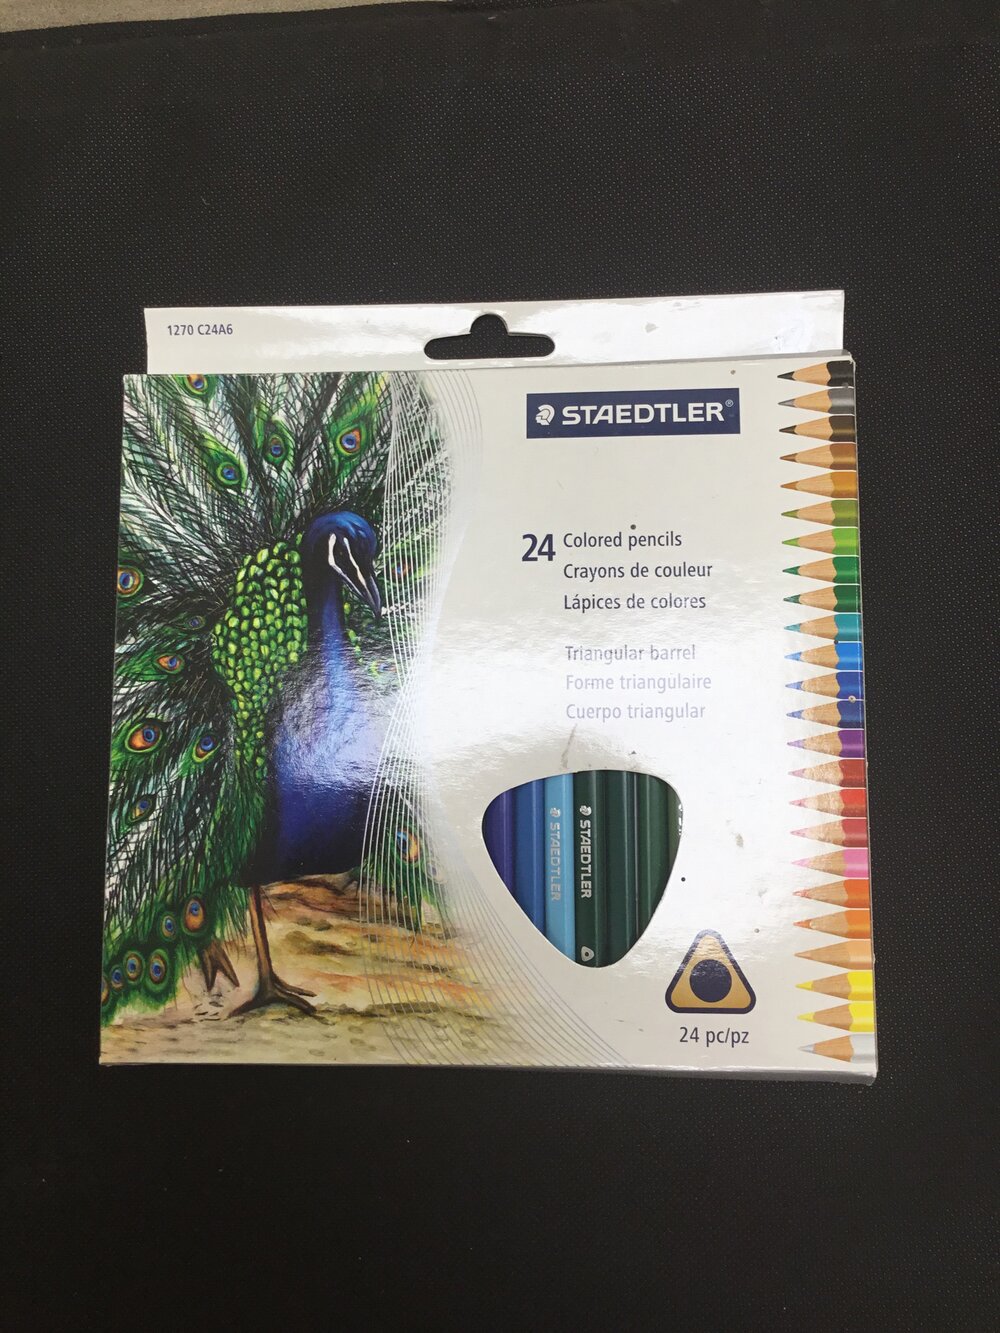 AS Staedtler Colored Pencils — CNY's #1 Art Classes! for Every SKILL Level  Painting & Drawing